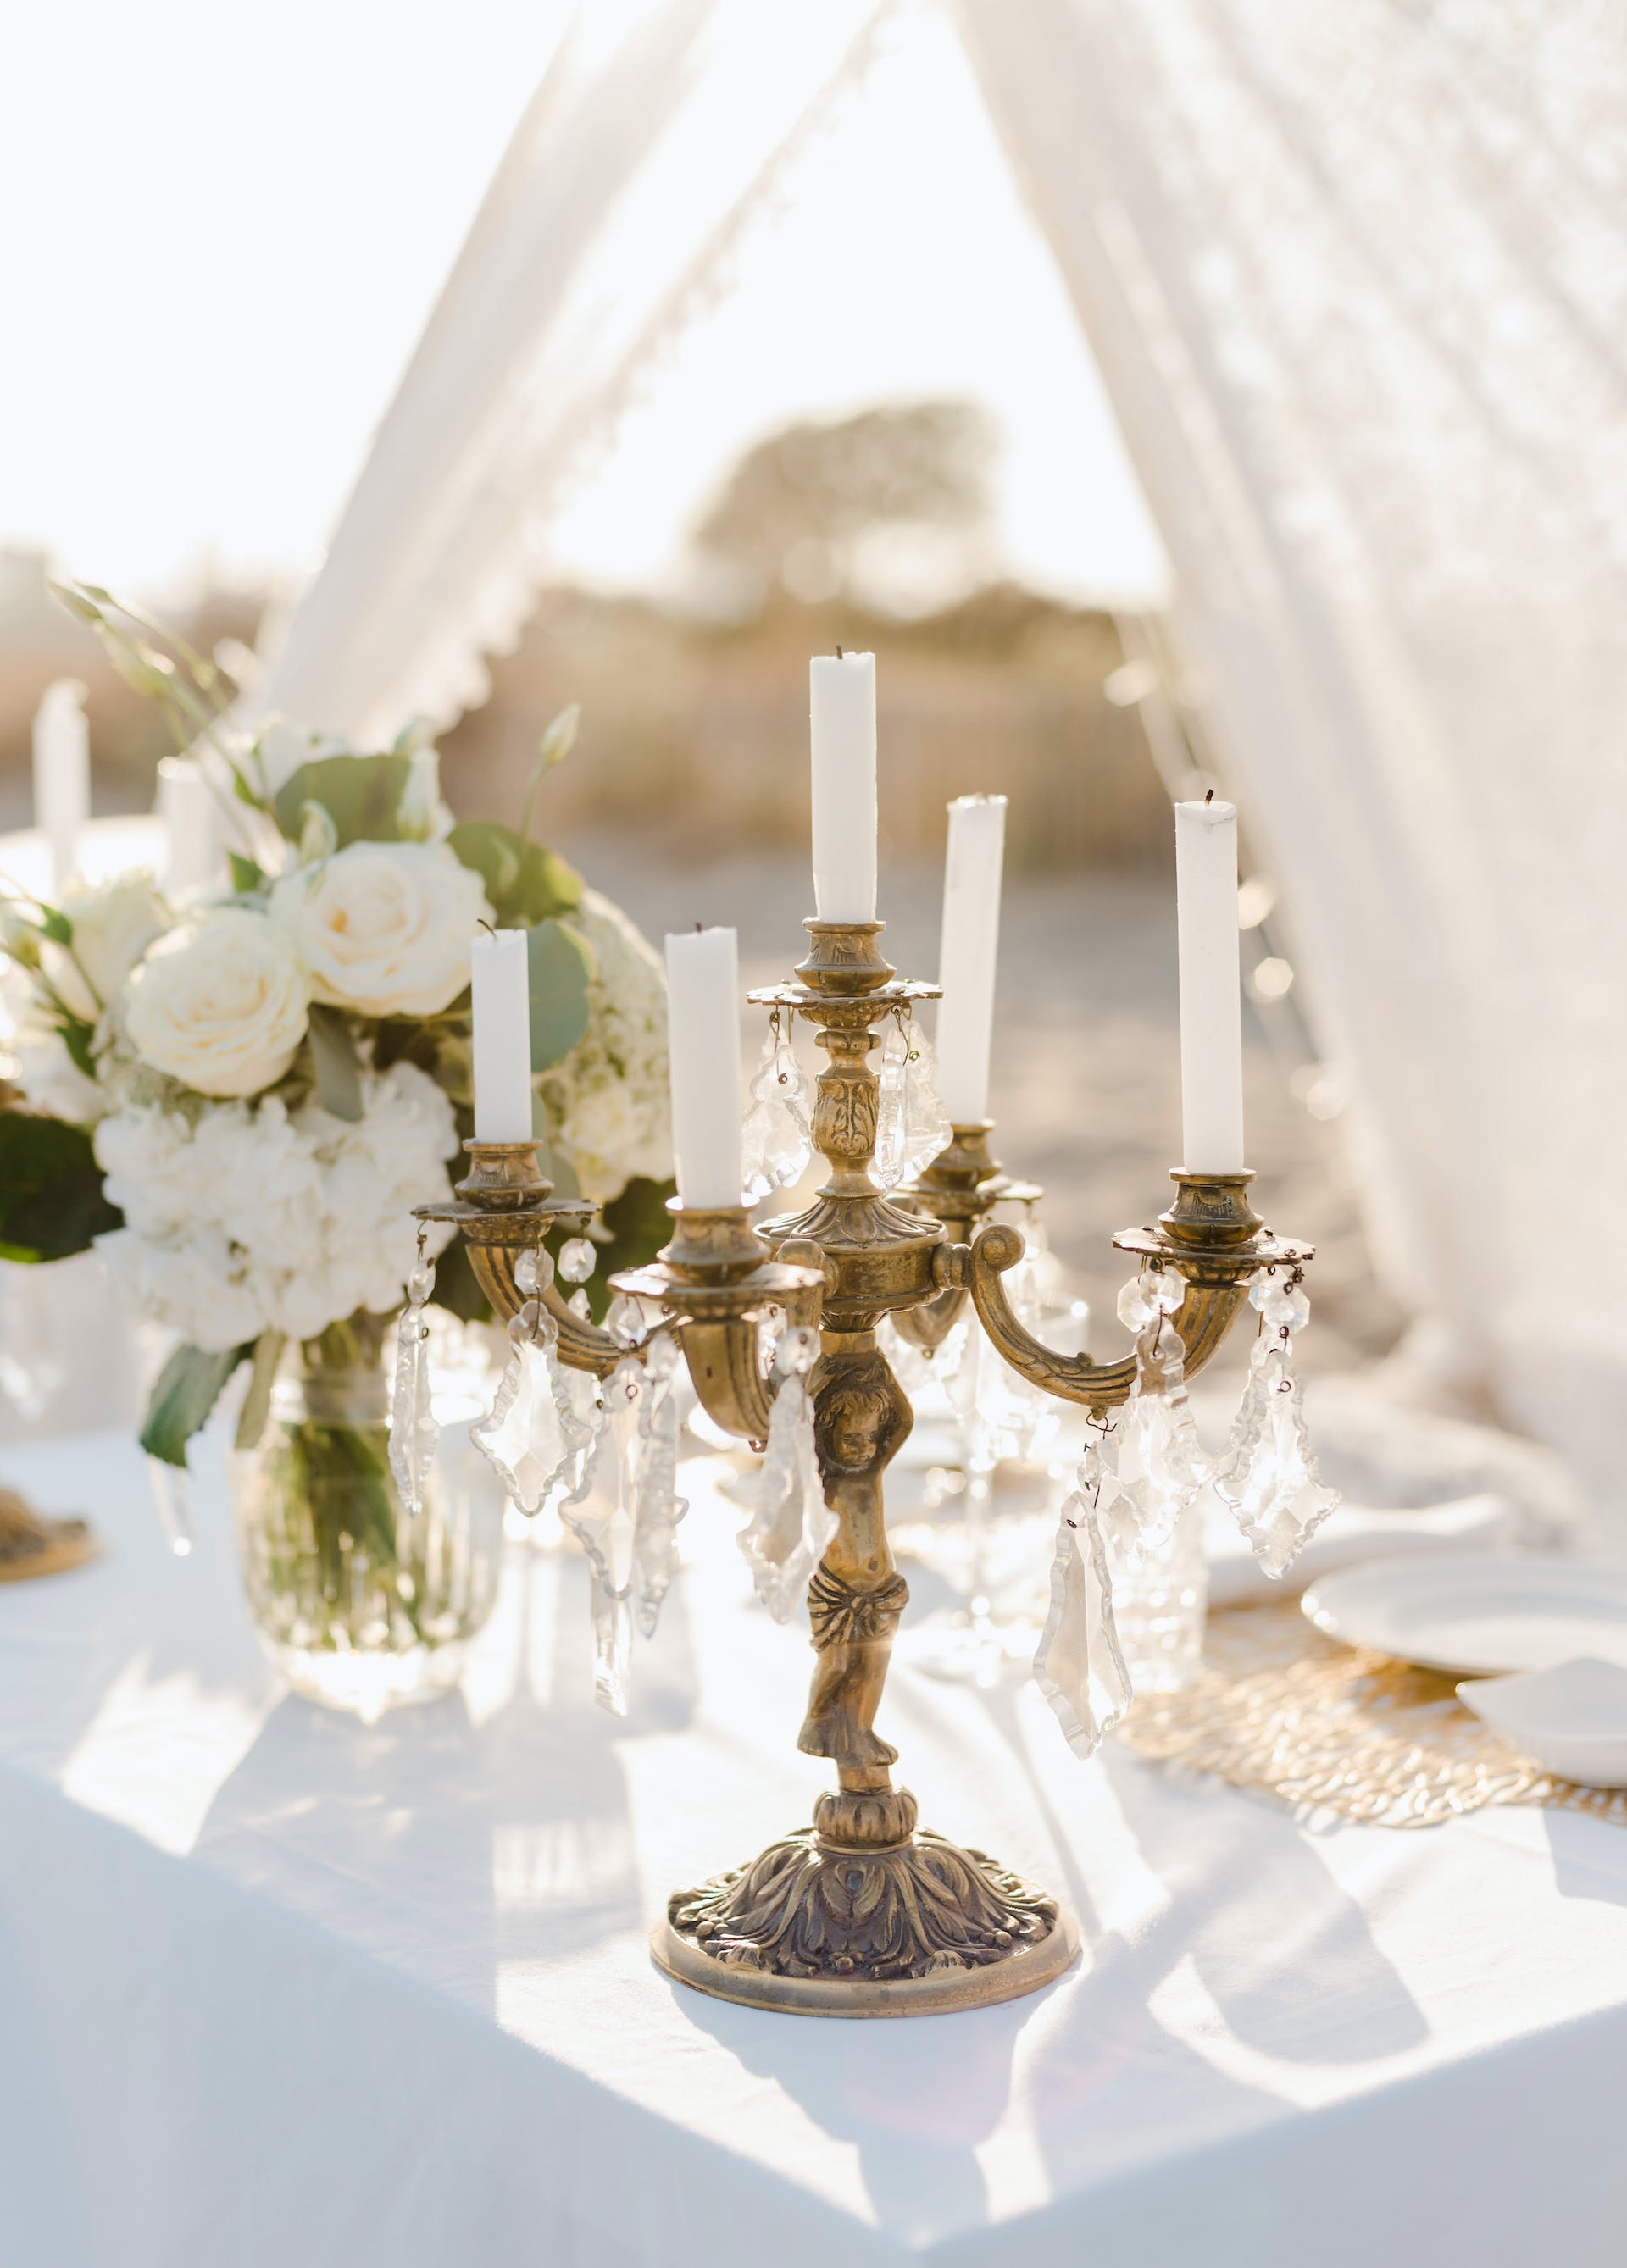 Elegant candle holders and a white bouquet in a vase | Source: Pexels